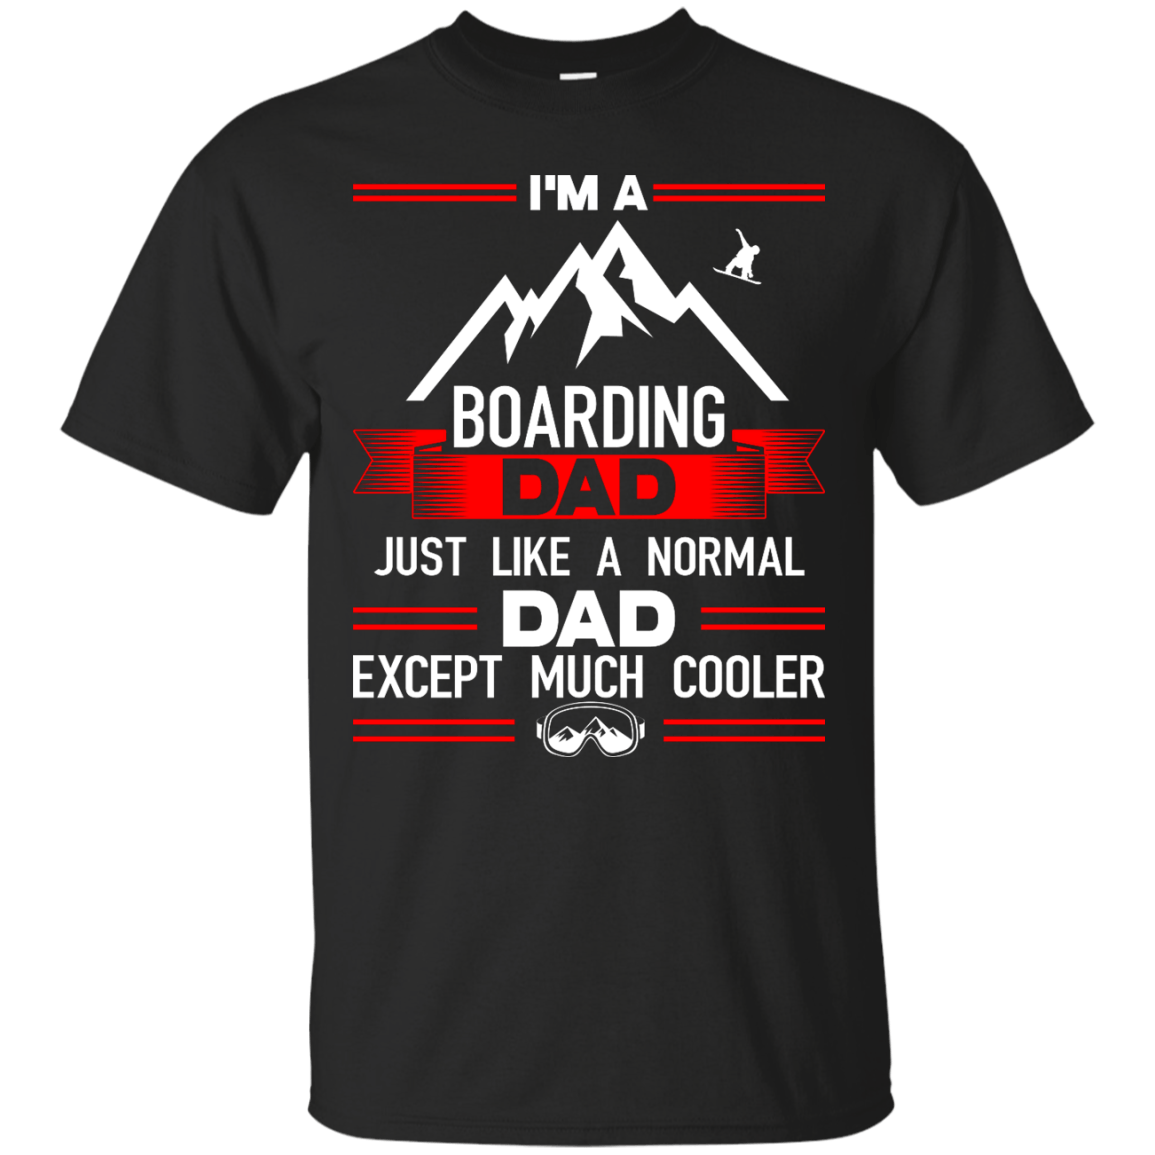 I'm A Boarding Dad Just Like A Normal Dad Except Much Cooler Tees - Powderaddicts